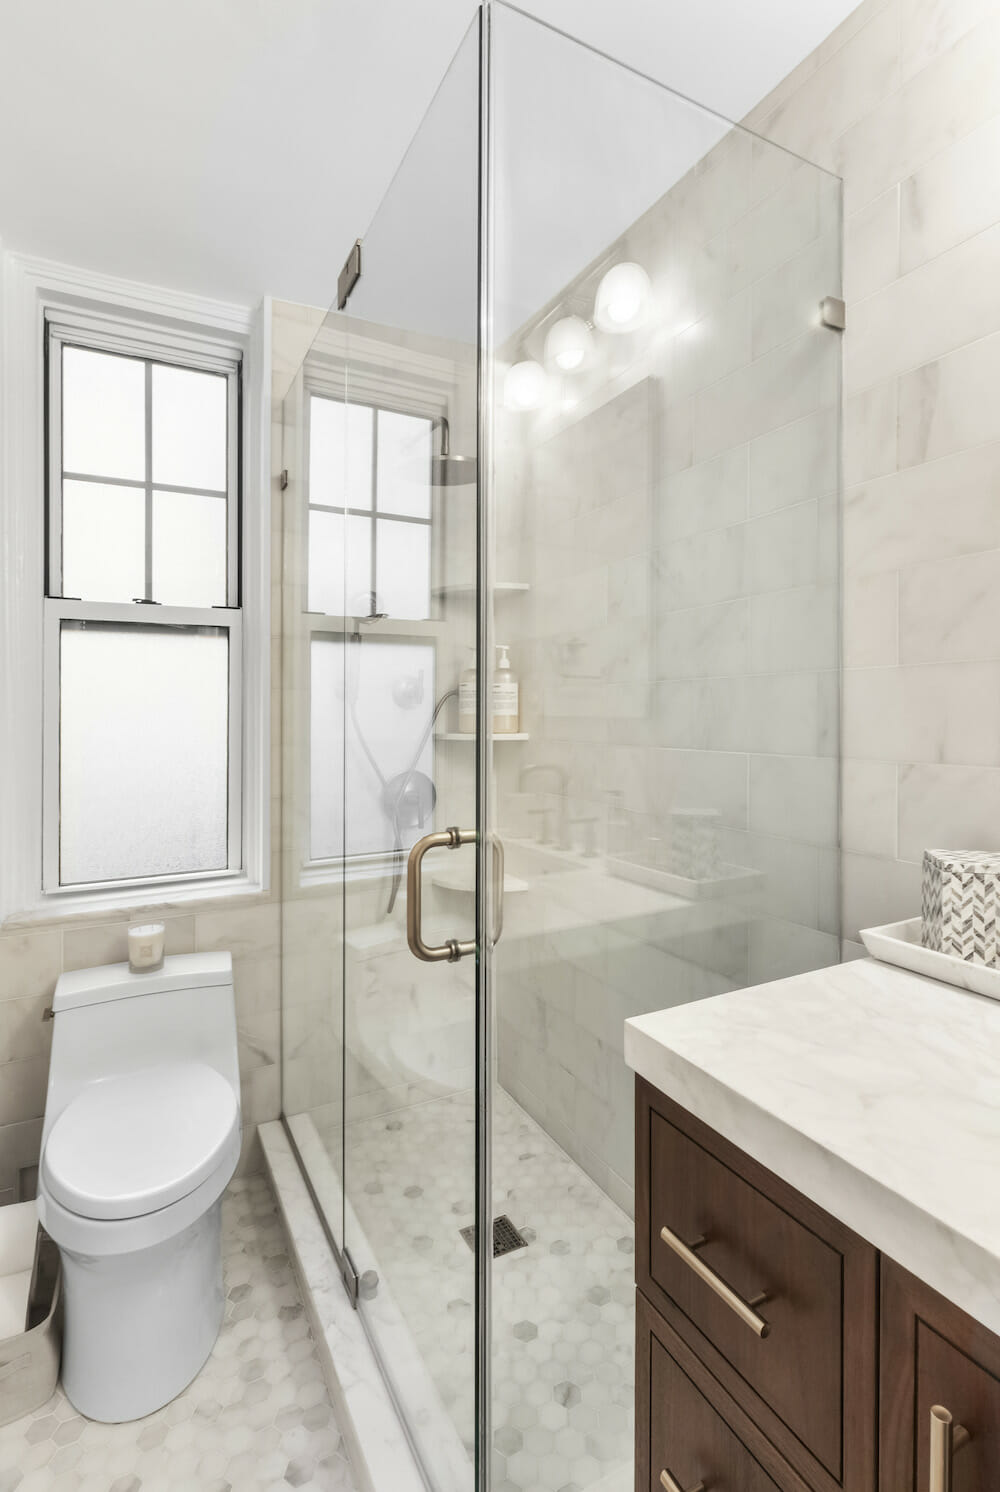 bathroom vanity with marble countertop and toilet below window and walk-in shower with glass wall and door after renovation